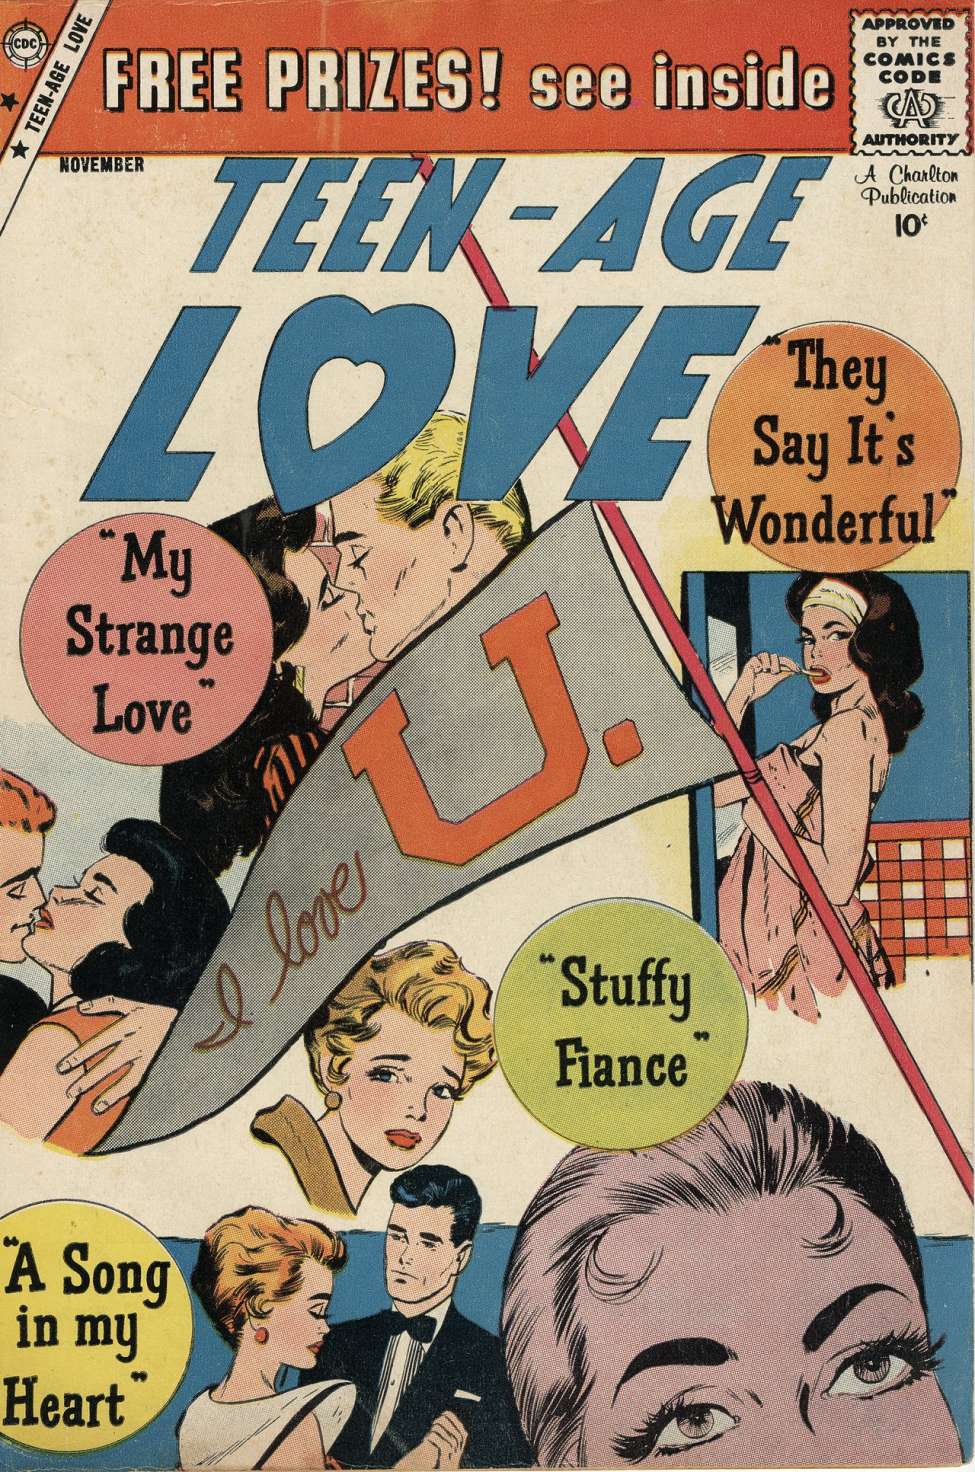 Comic Book Cover For Teen-Age Love 11